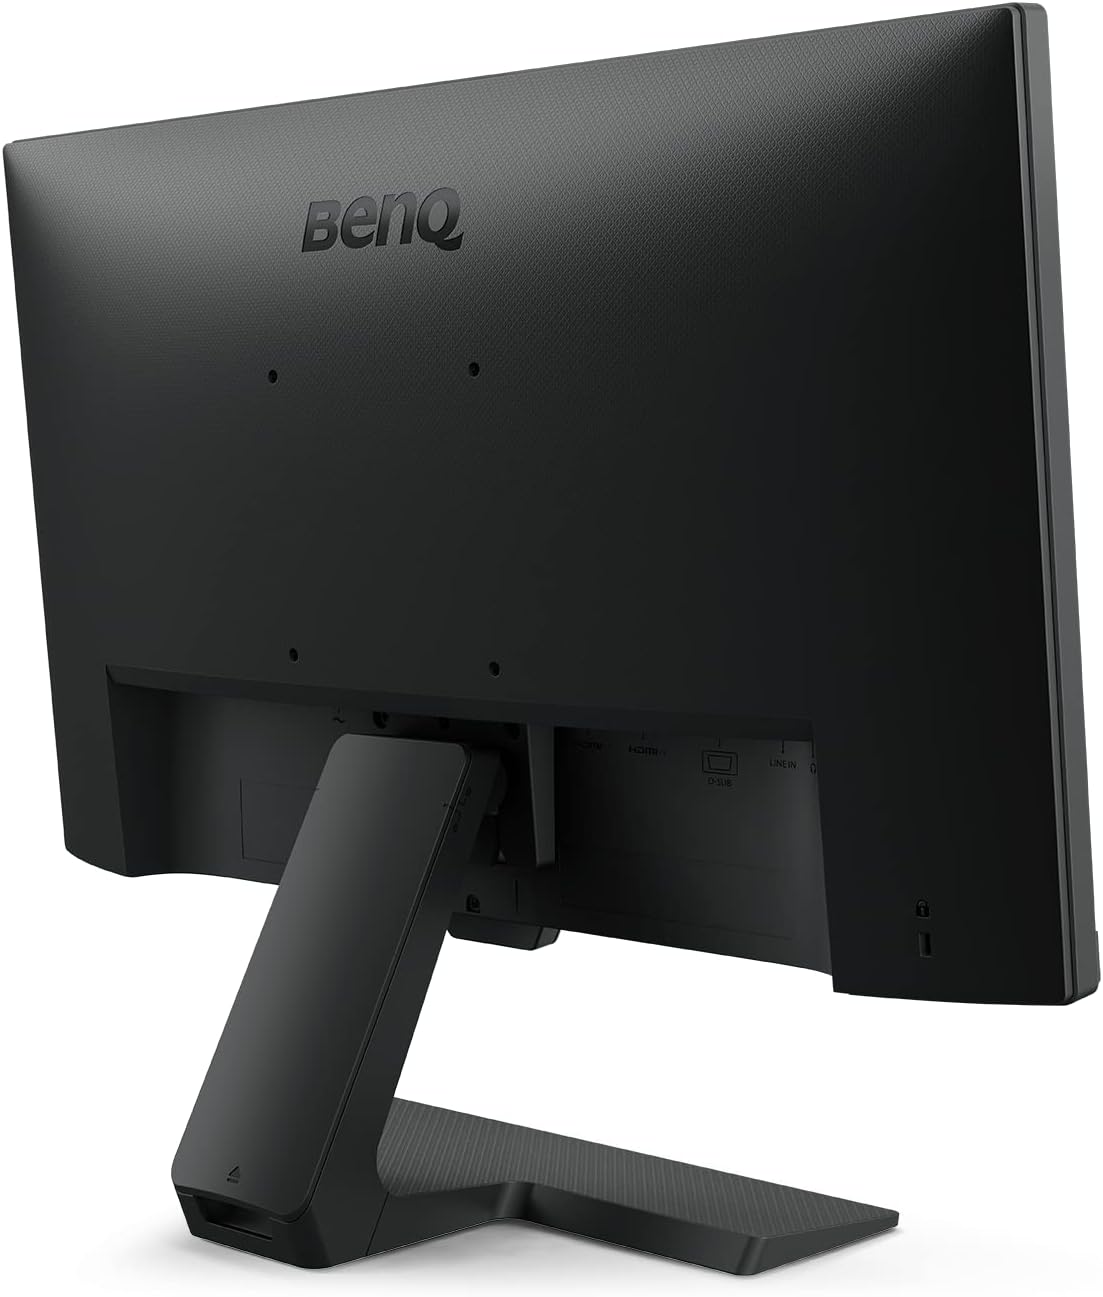 BenQ GW2283 Eye Care 22 inch IPS 1080p Monitor | Optimized for Home & Office with Adaptive Brightness Technology , Black